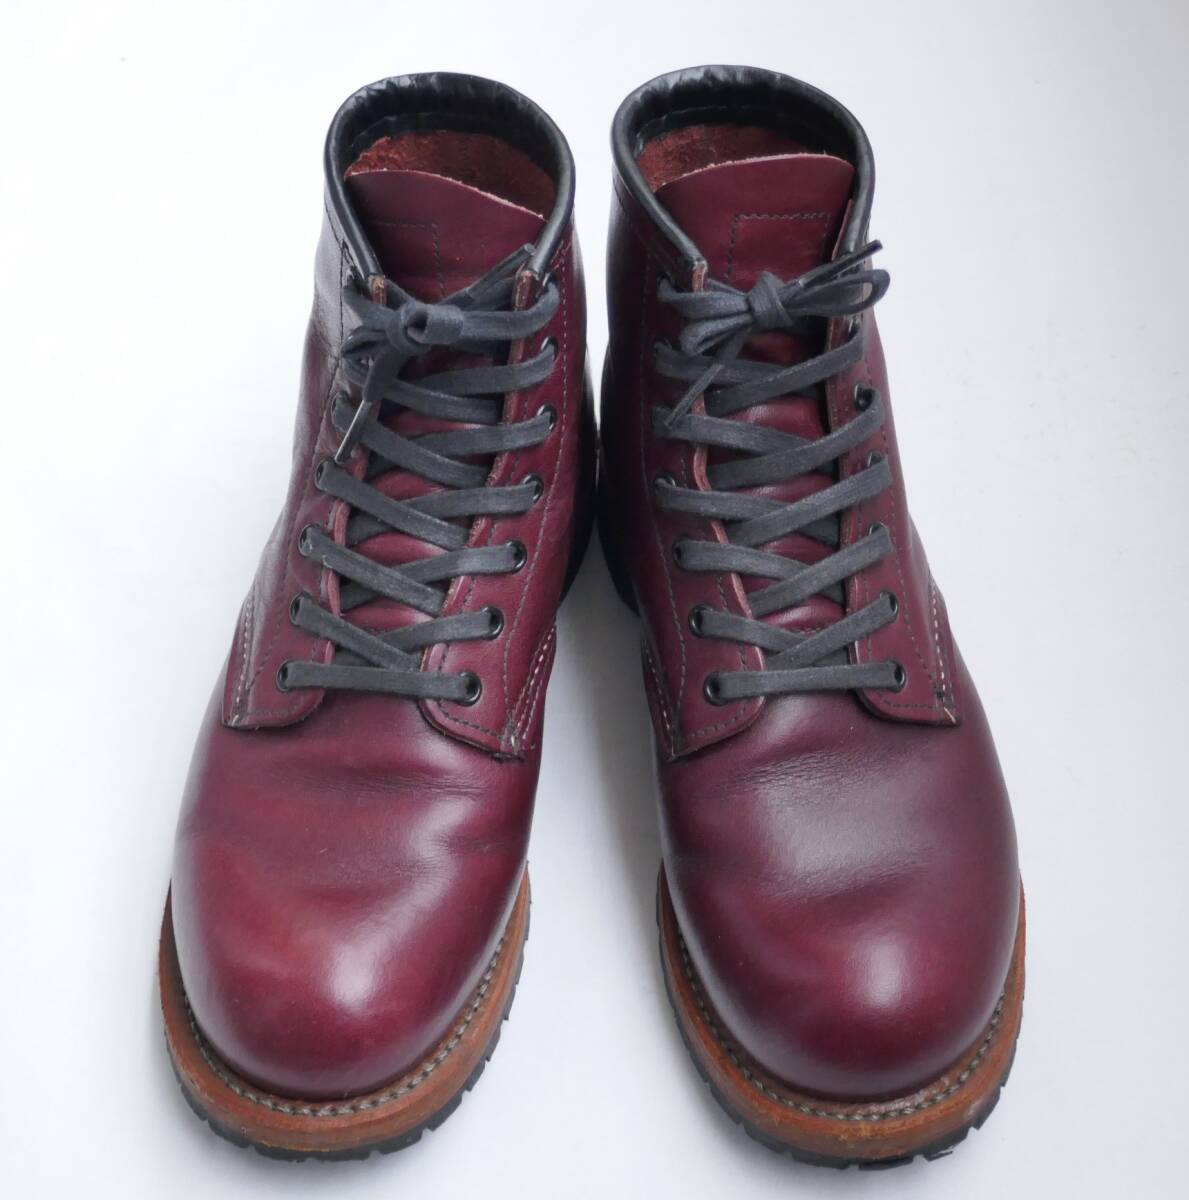 RED WING(レッドウィング) ベックマン ブーツ US 5.5D MADE IN USAの画像3